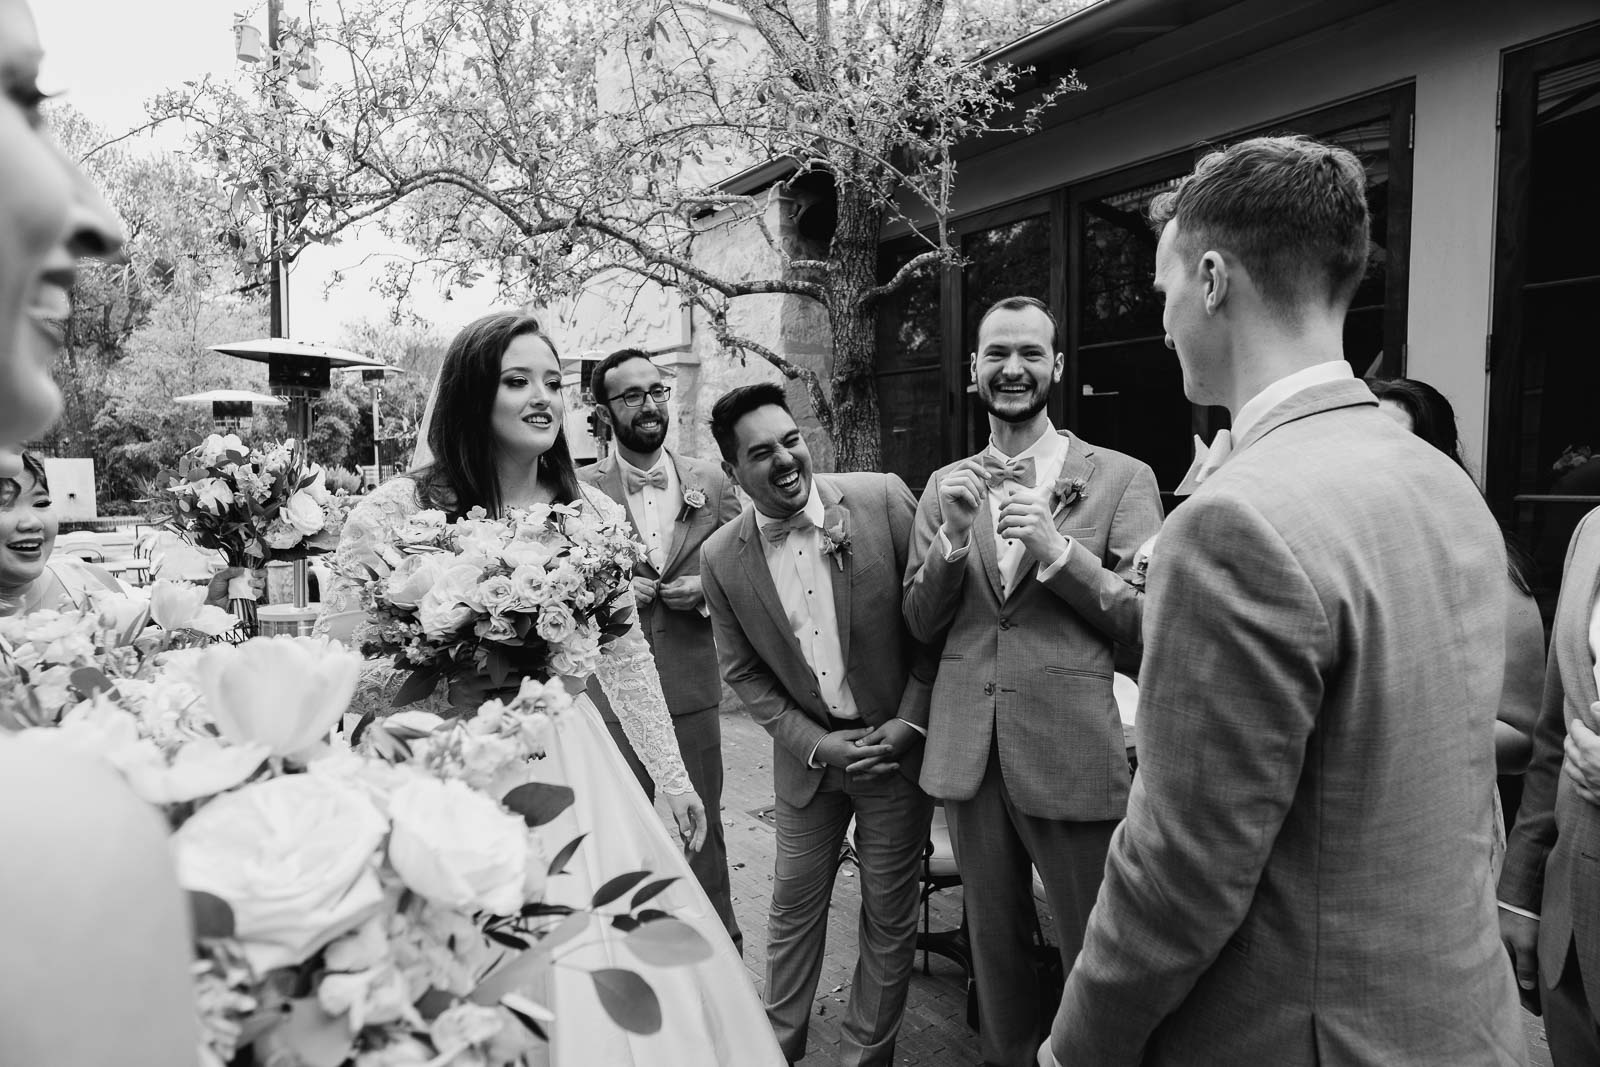 The bridal parties around the bar and groom as laughs abound in the groomsmen